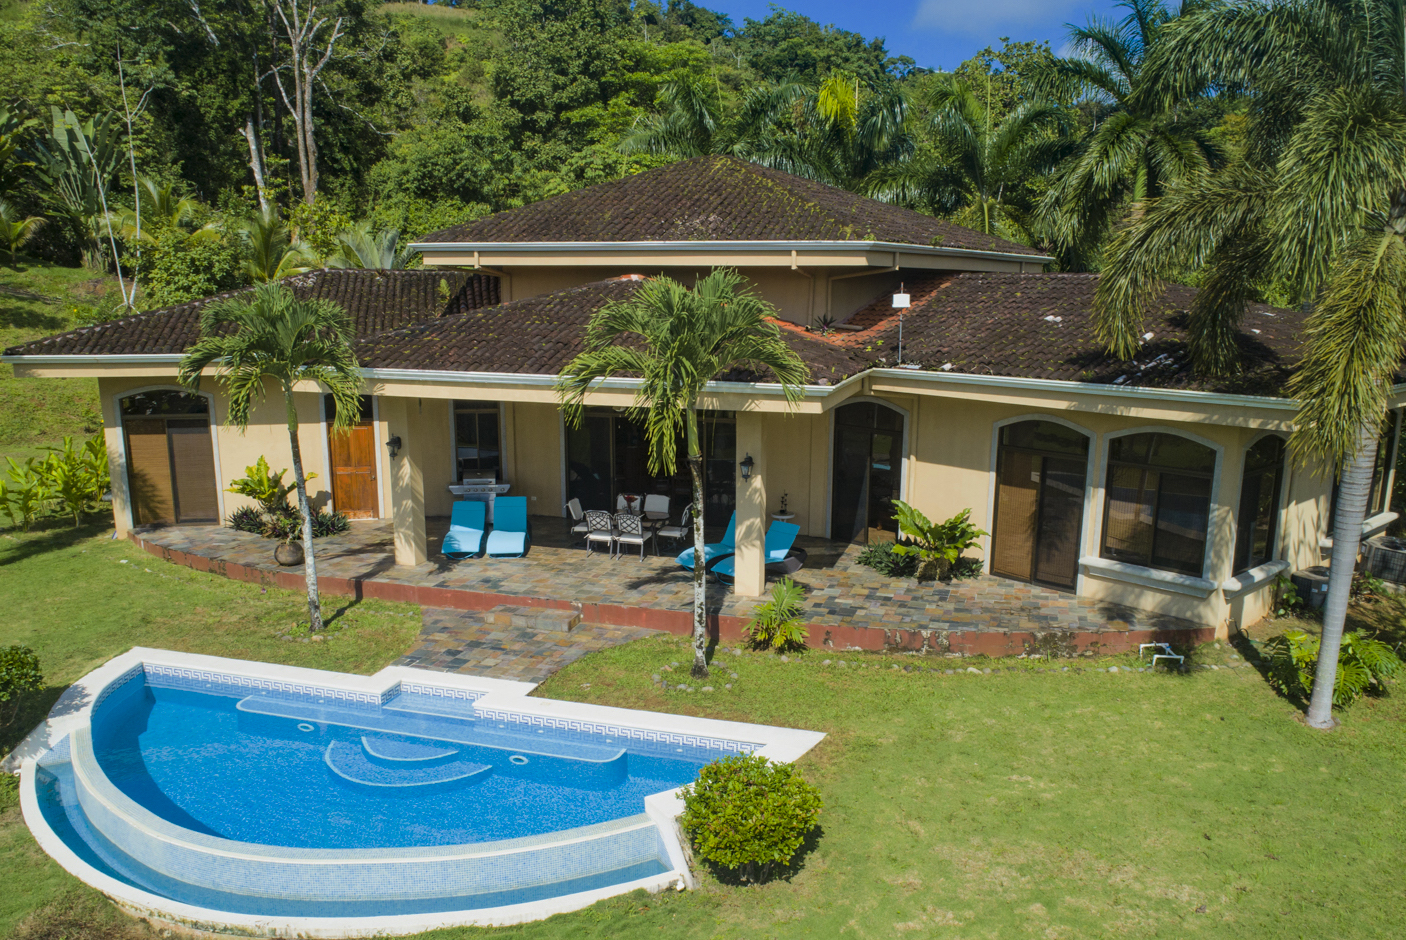 4.8 ACRES - 3 Bedroom Luxury Ocean View Home With Pool Adjacent To Nature Reserve!!!